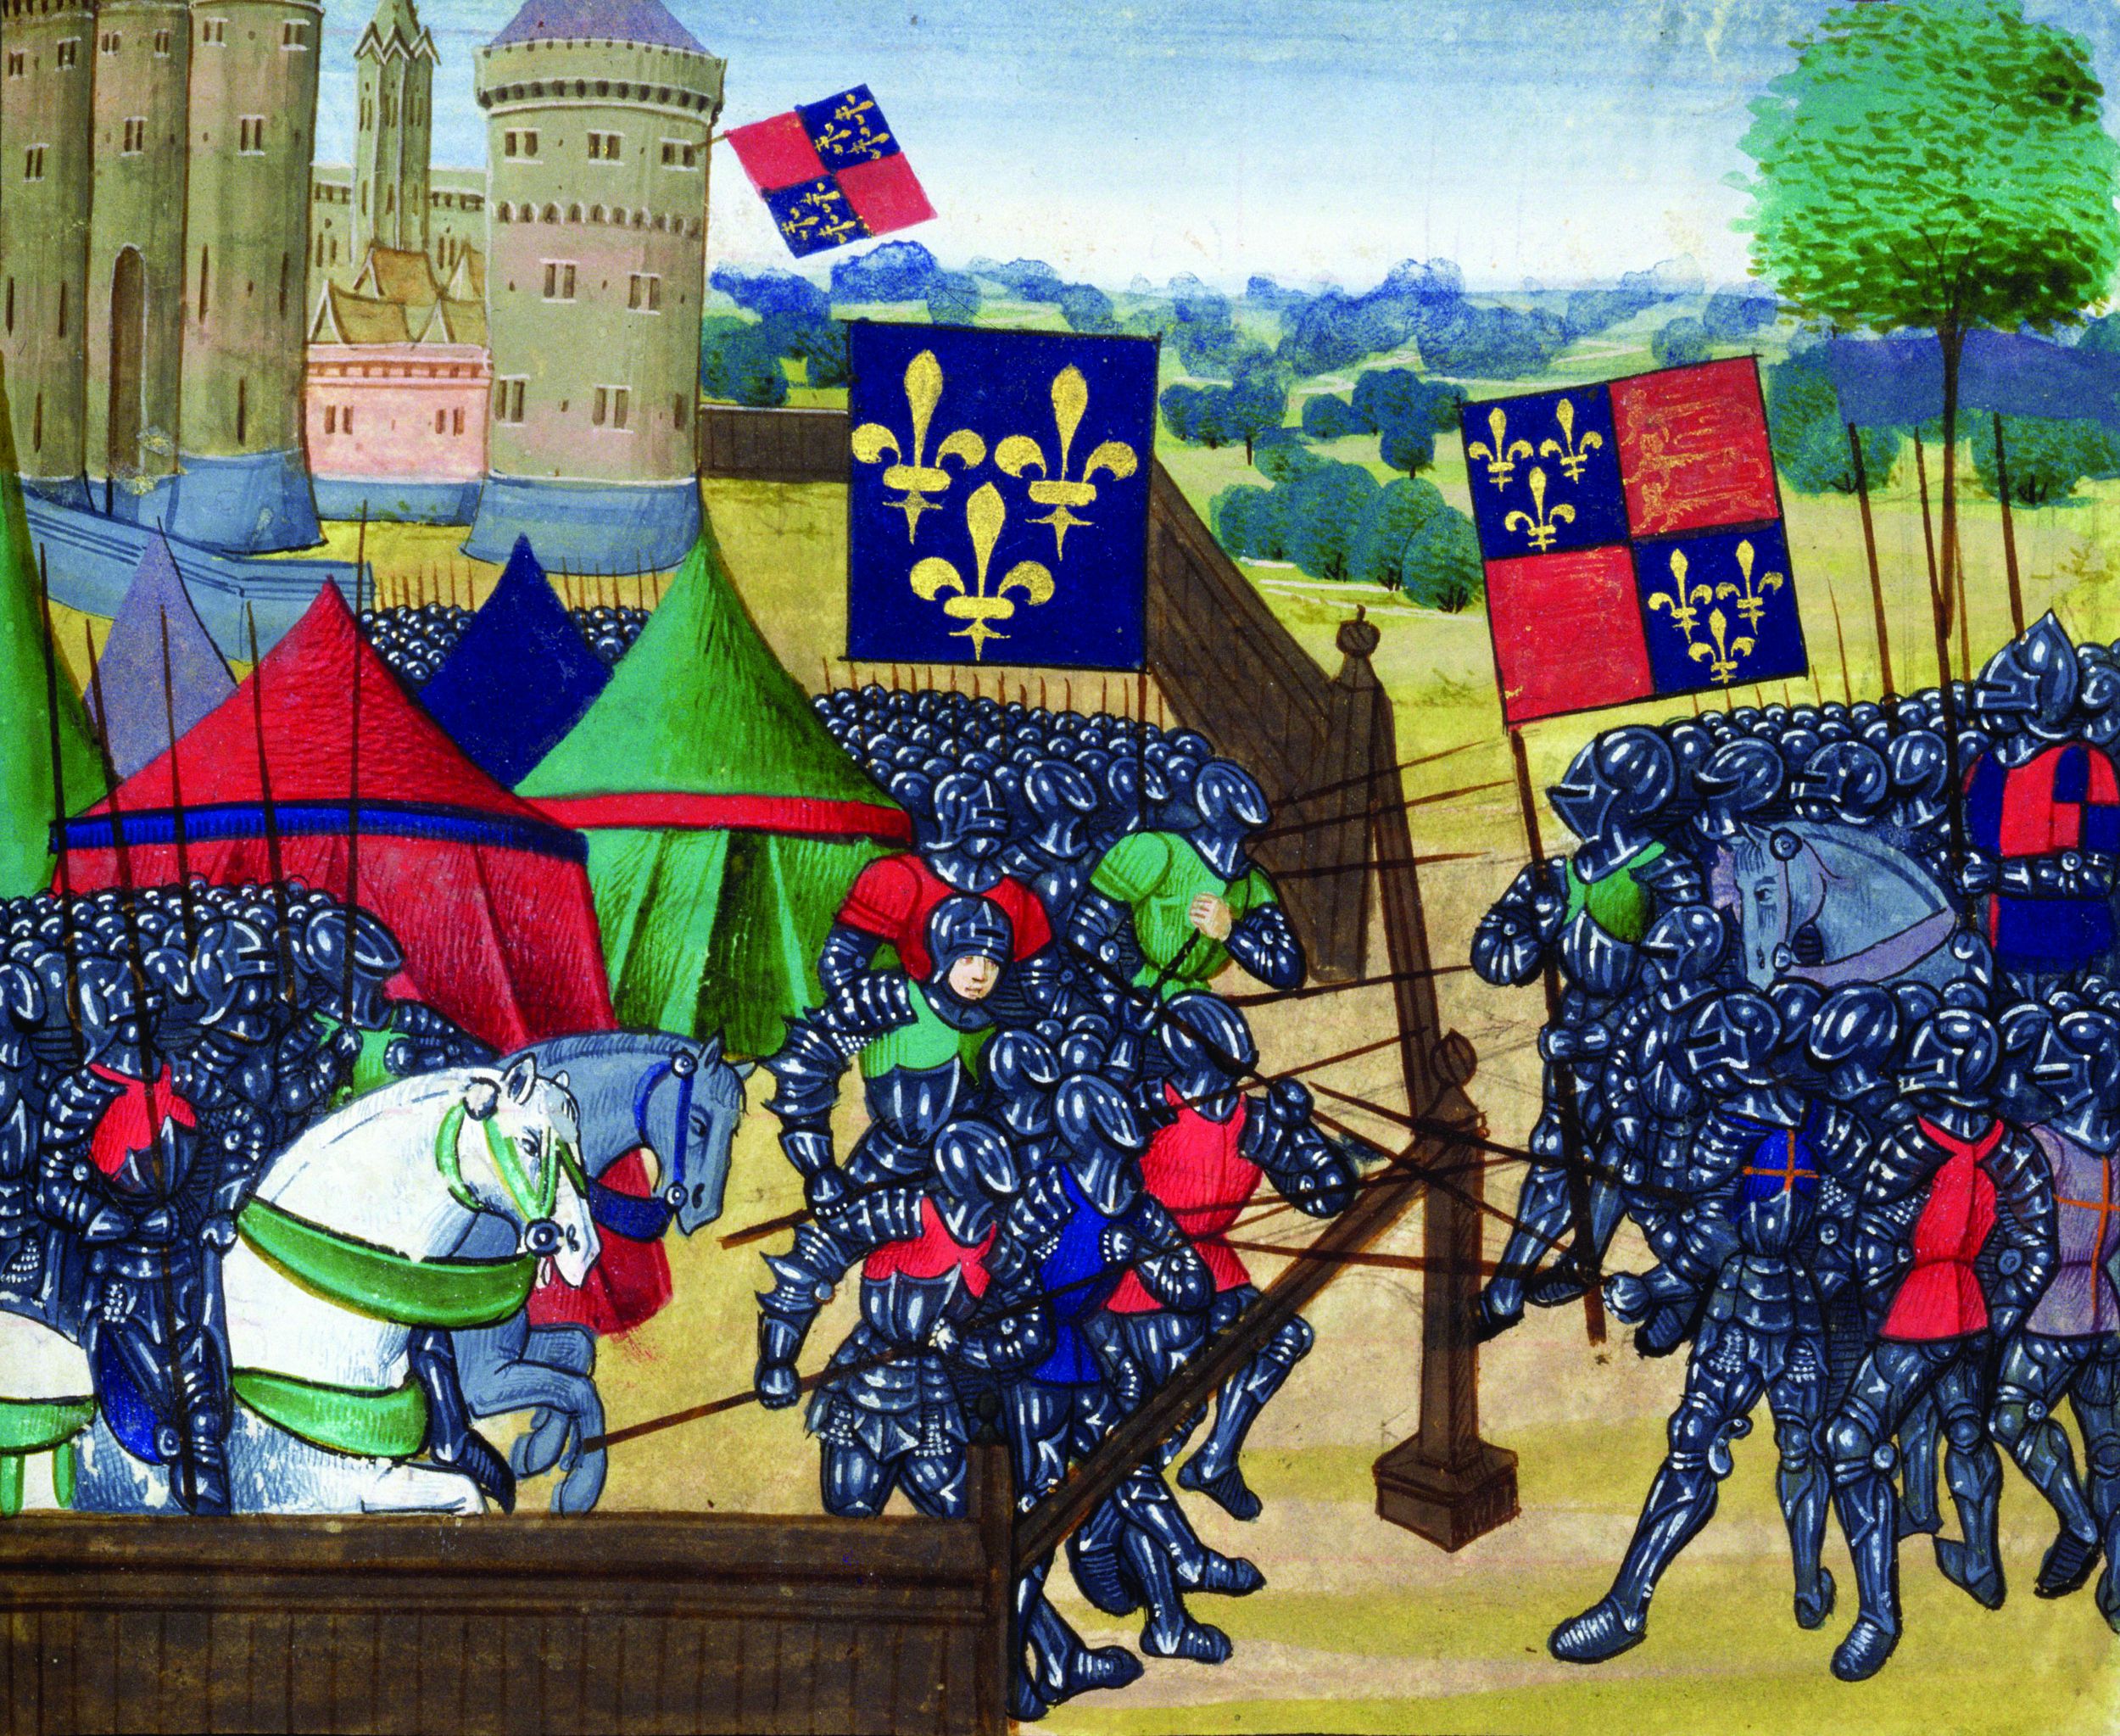 The siege of Castillon, illustrated by Jean Chartrier in a late 15th-century account of the life and times of French King Charles VII.